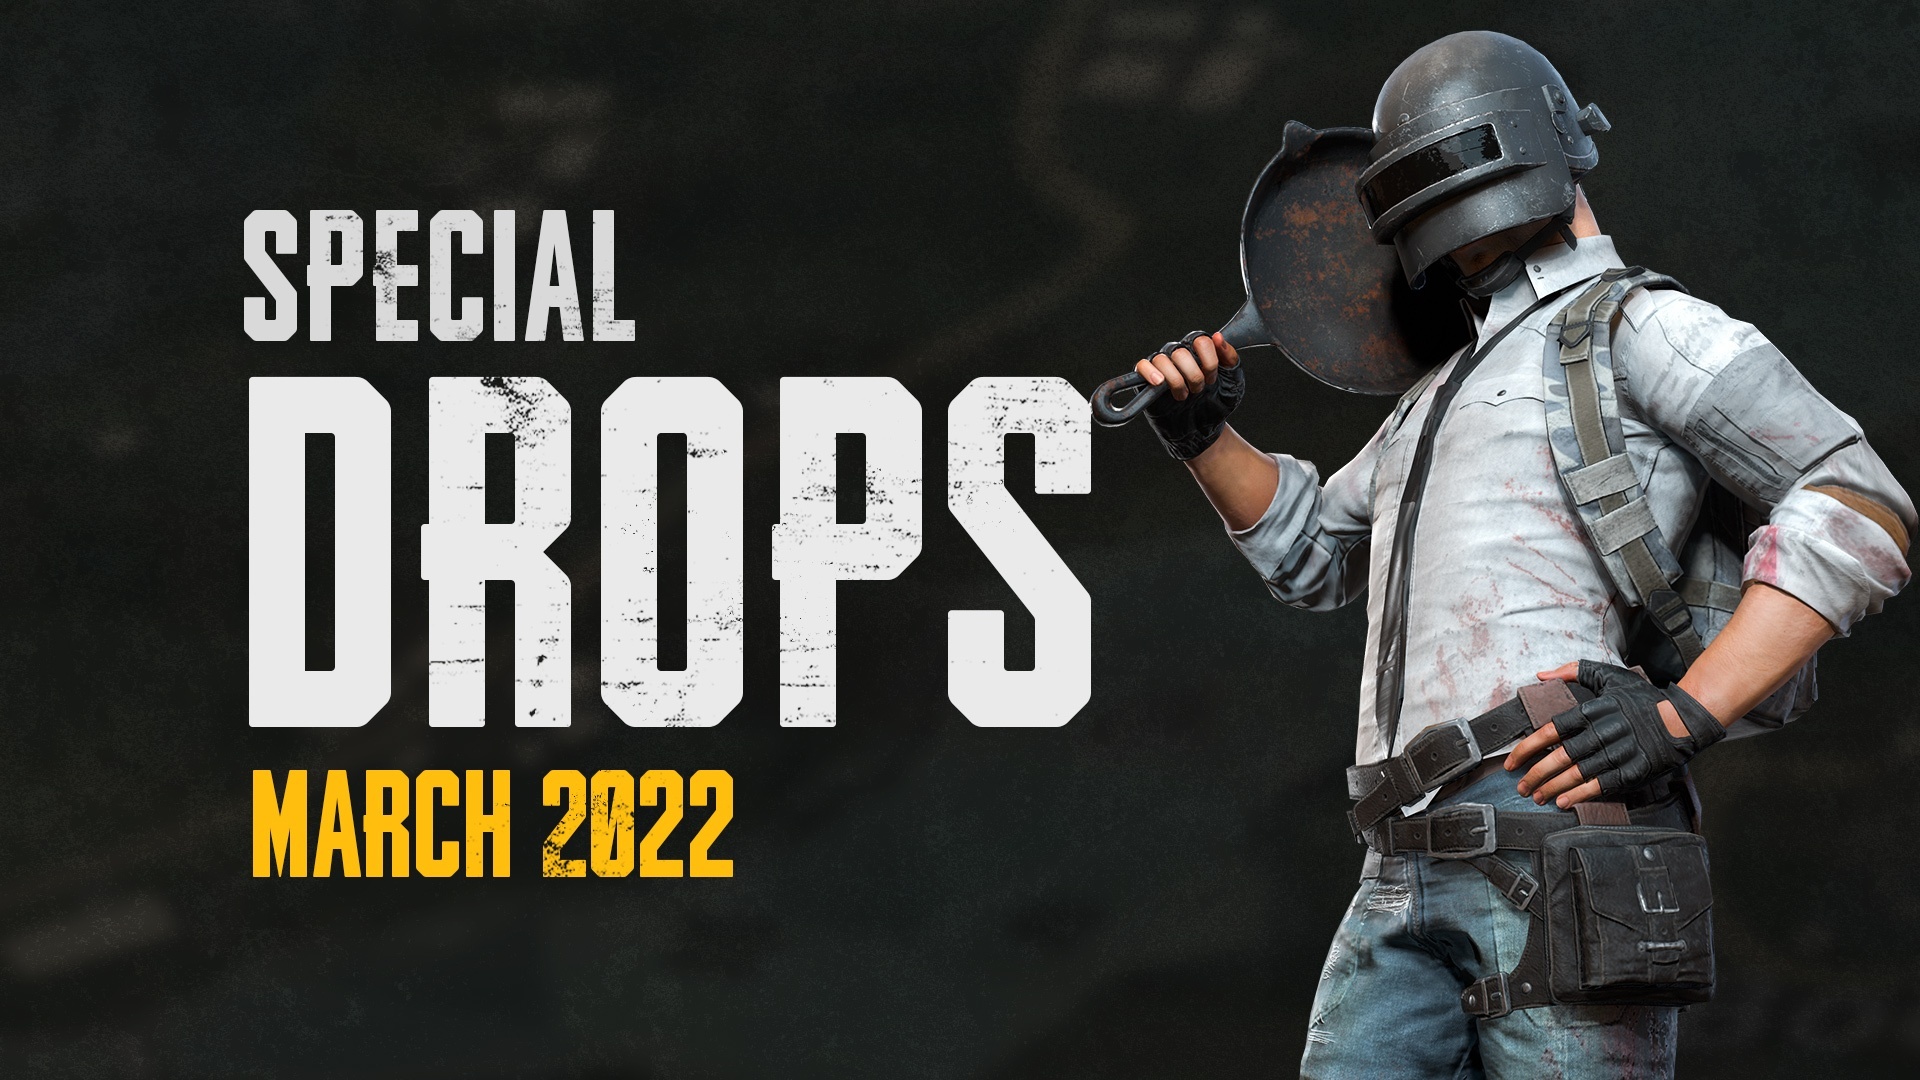 How to claim Rainbow Six Siege Prime Gaming rewards (March 2022